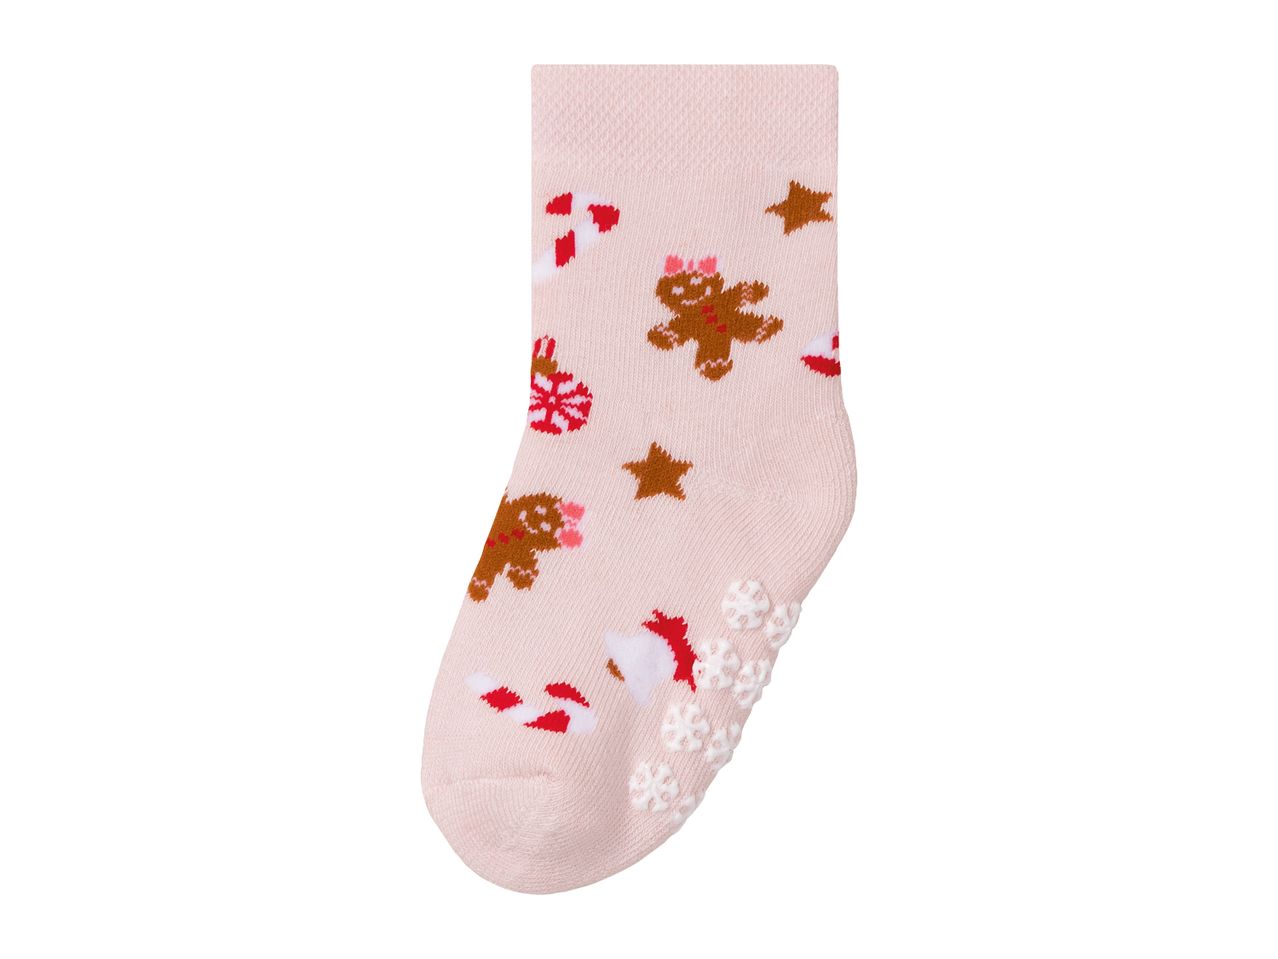 Go to full screen view: Lupilu Younger Kids’ Christmas Thermal Socks - 2 pairs - Image 1